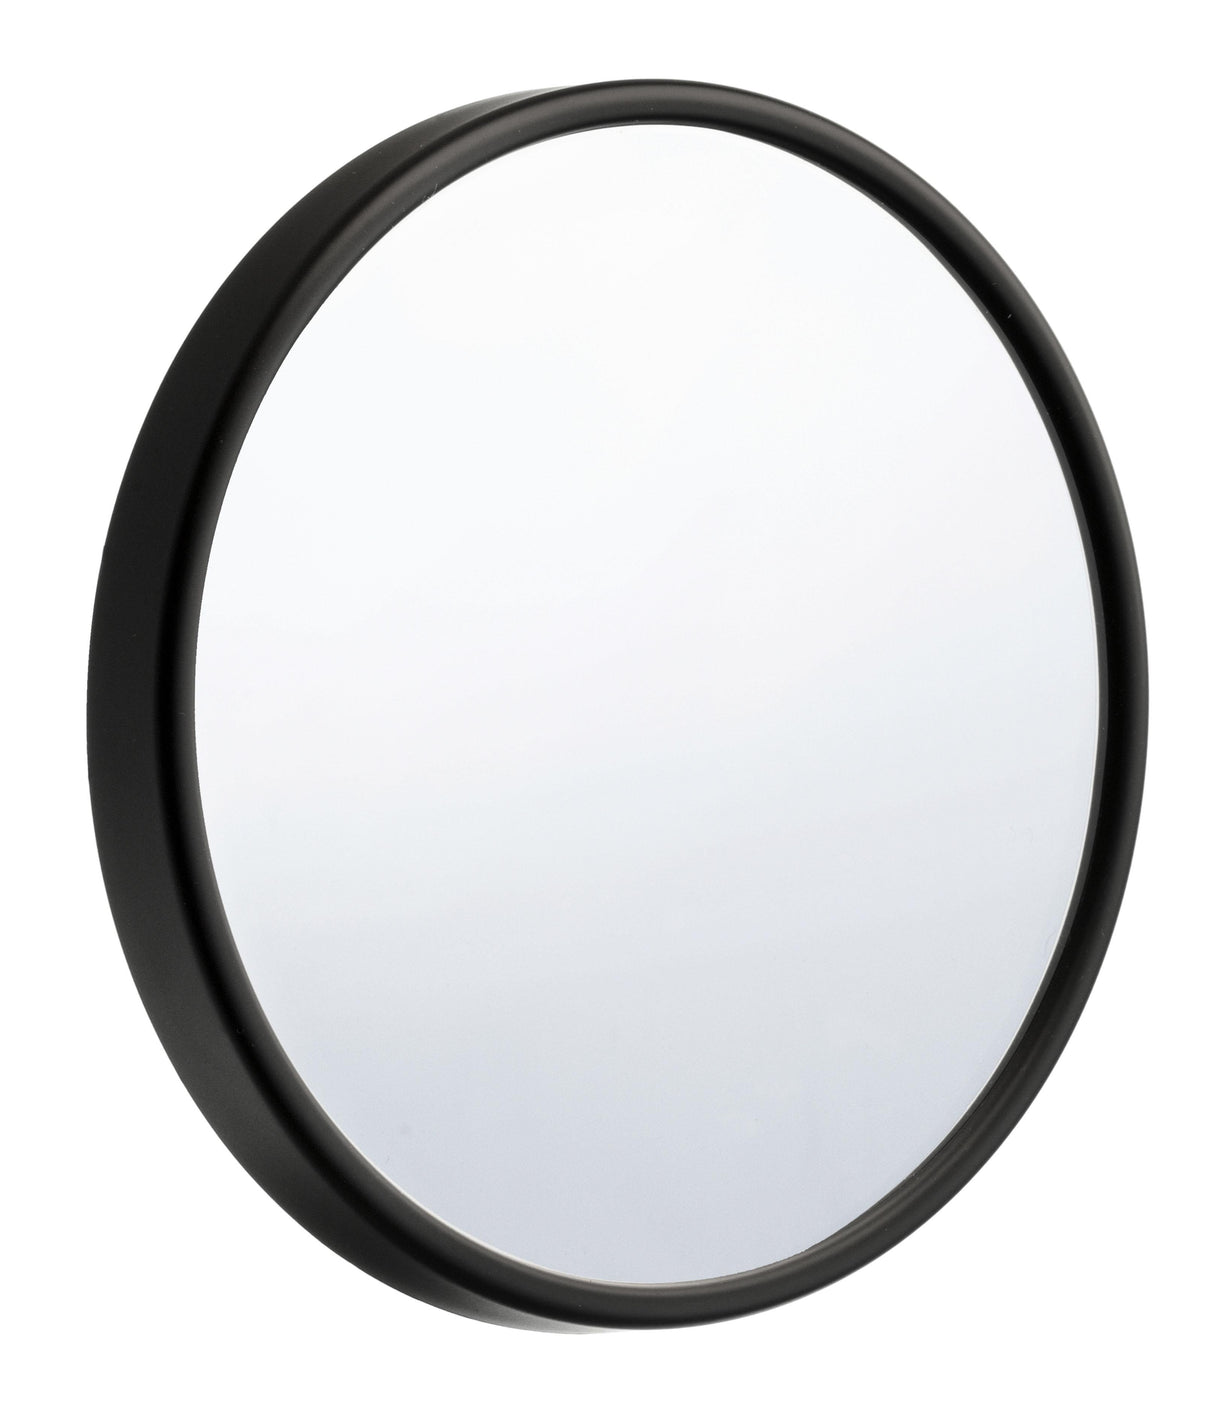 Smedbo Outline Lite Make-up Mirror with Suction Cups 12x Magnification in Matte Black